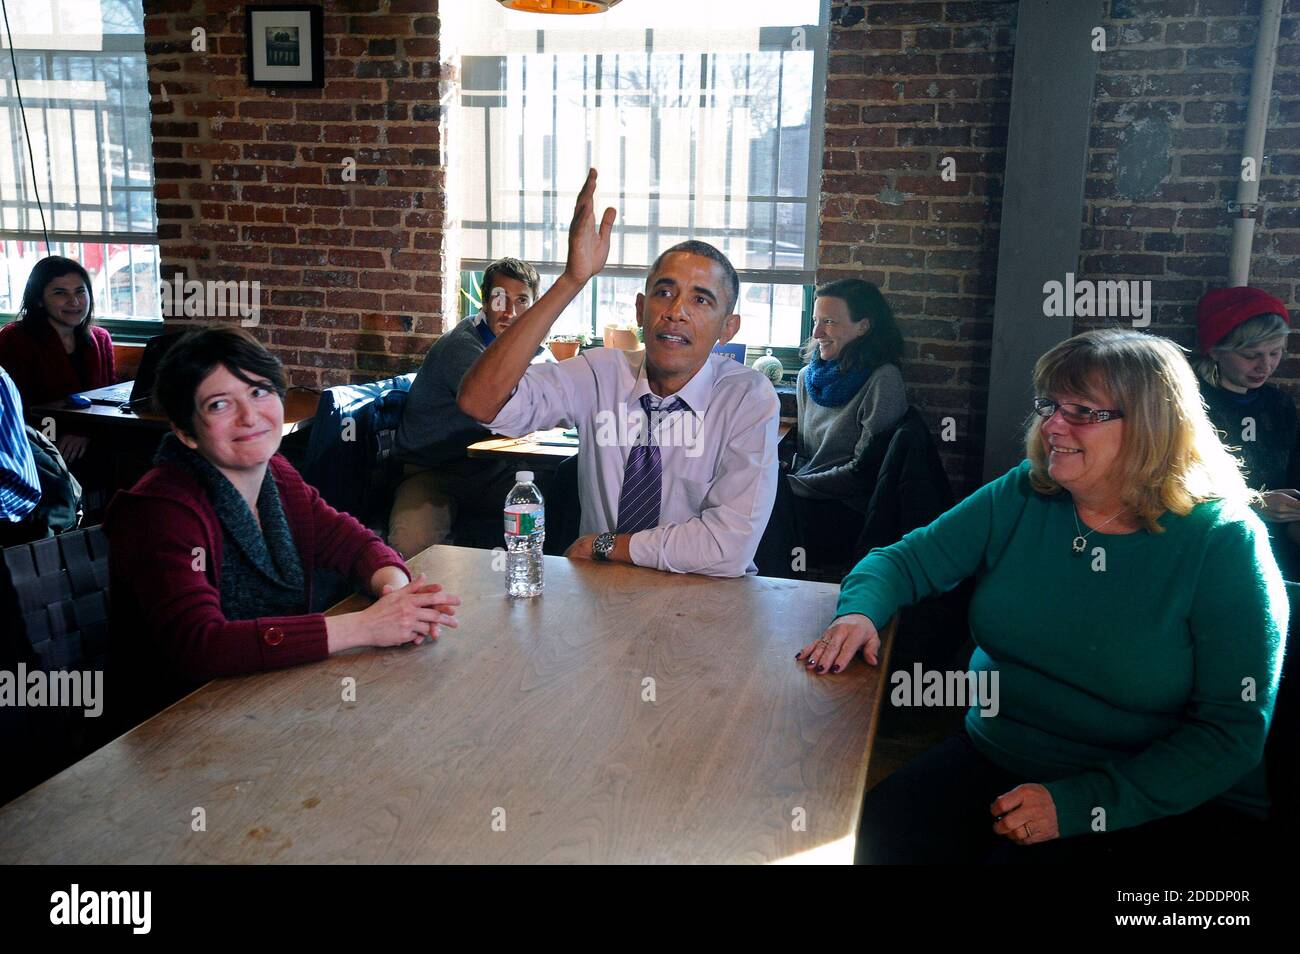 NO FILM, NO VIDEO, NO TV, NO DOCUMENTARY - President Barack Obama, center, ate lunch with Amanda Rothschild, left, Mary Stein, right, and another woman, not pictured, at Charmington's Cafe to discuss the needs of all Americans as they balance their families and jobs on Jan. 15, 2015 in Baltimore, MD, USA. Photo by Kenneth K. Lam/Baltimore Sun/TNS/ABACAPRESS.COM Stock Photo